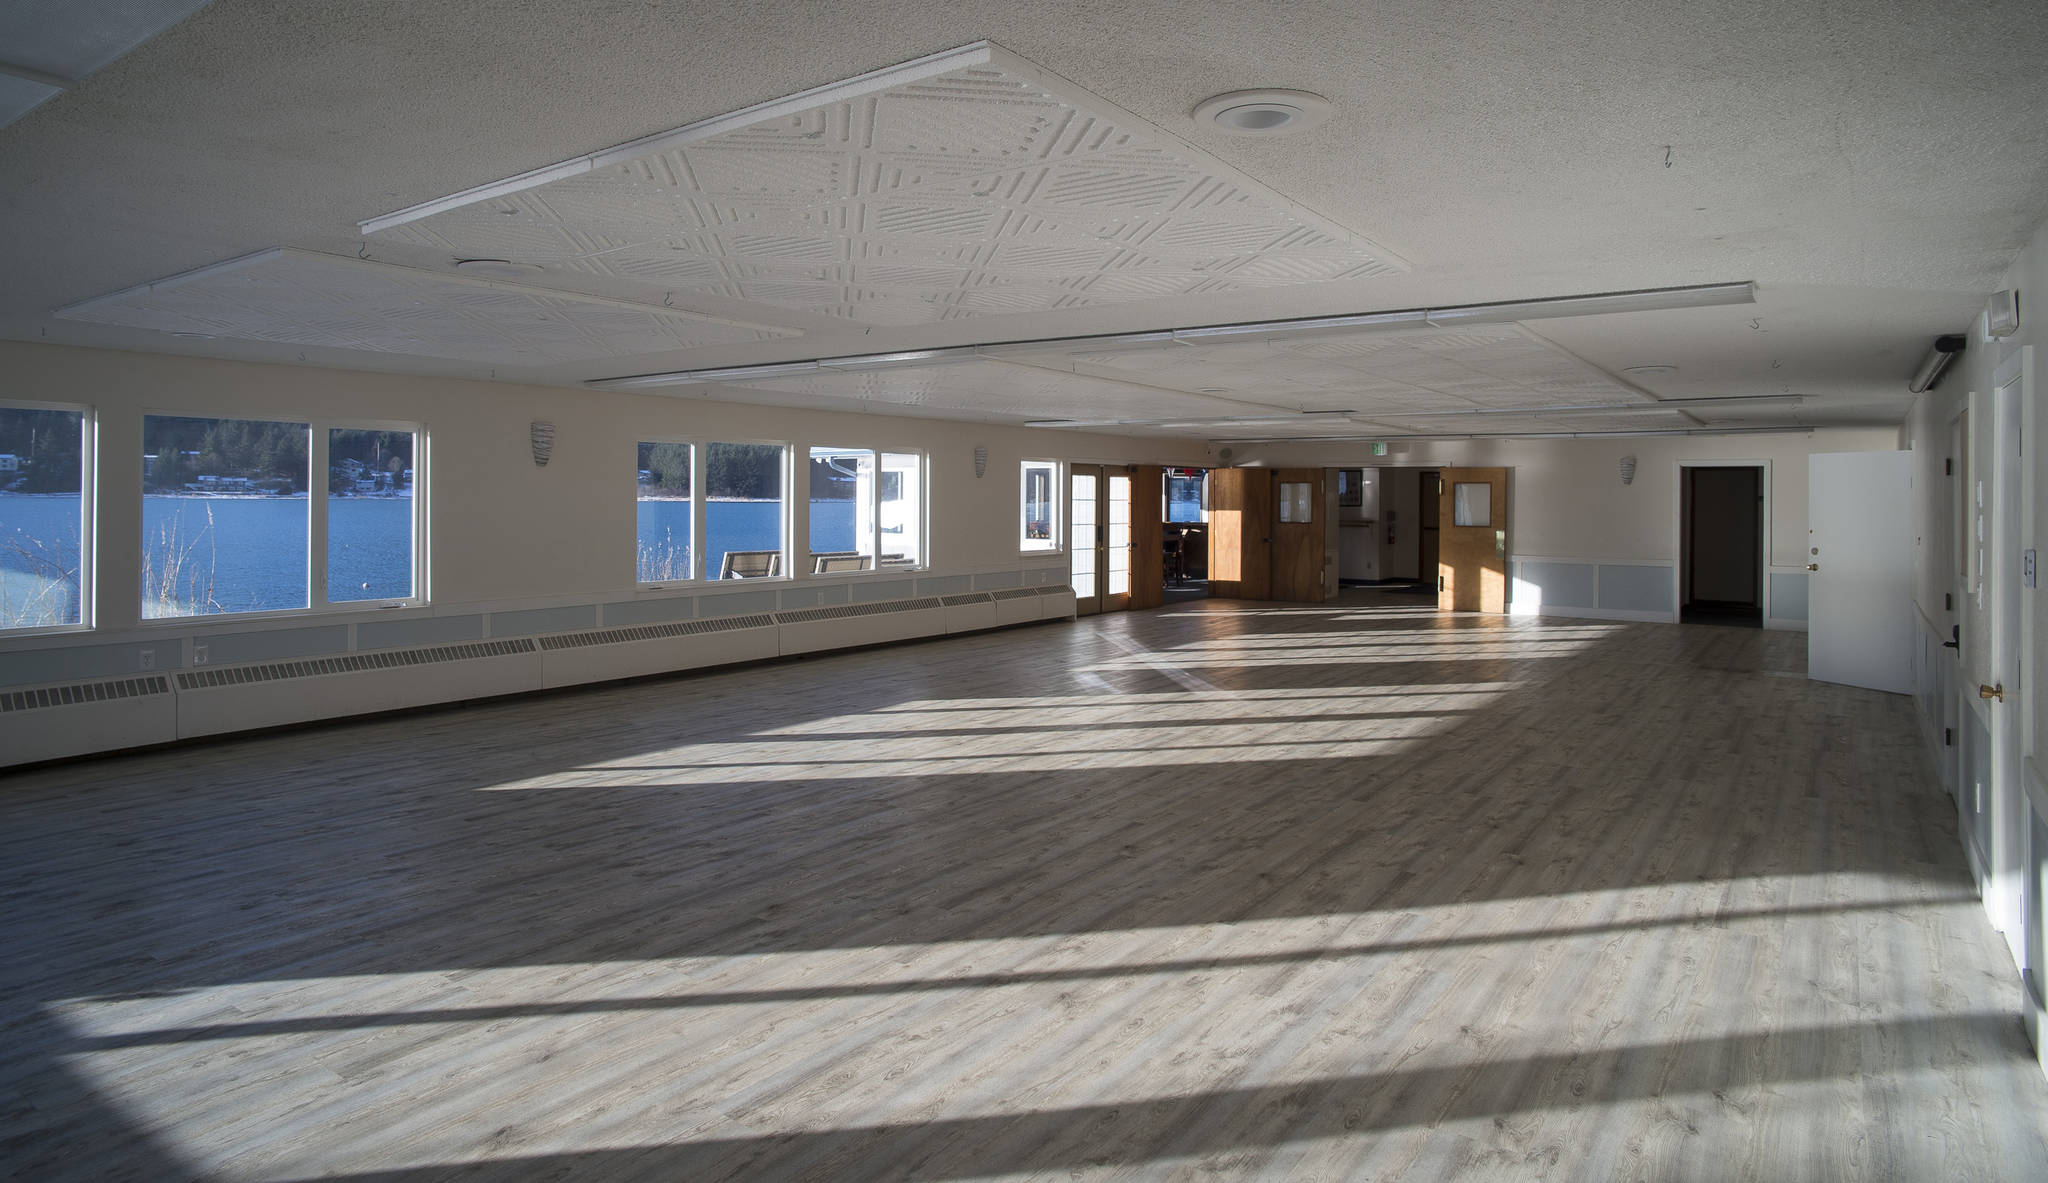 Renovations at the Juneau Yacht Club at Aurora Harbor include new flooring, a new outdoor deck and changes to allow more than one event to take place at the same time. (Michael Penn | Juneau Empire)